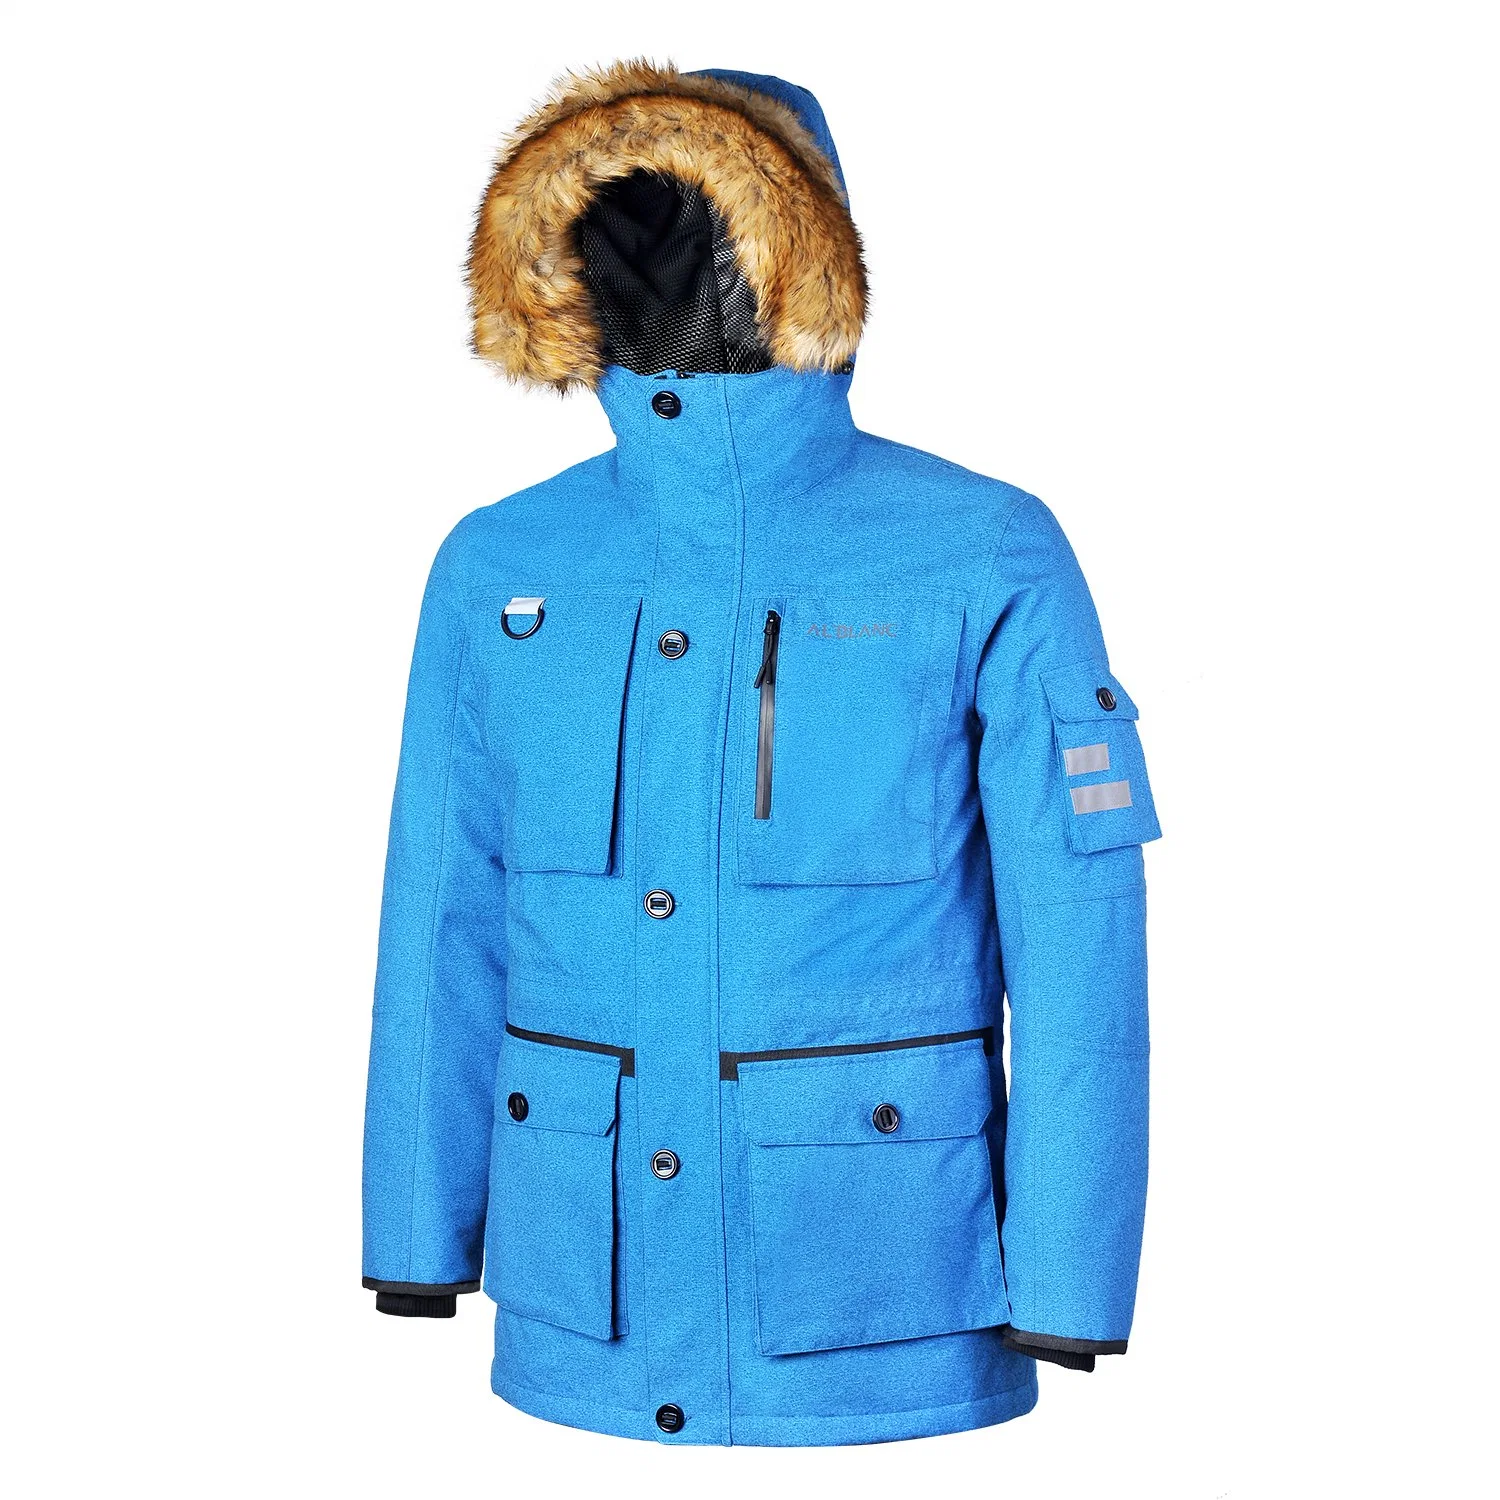 Blue Waterproof Windproof Breathable Outdoor Down Winter Puffer Padding Jacket